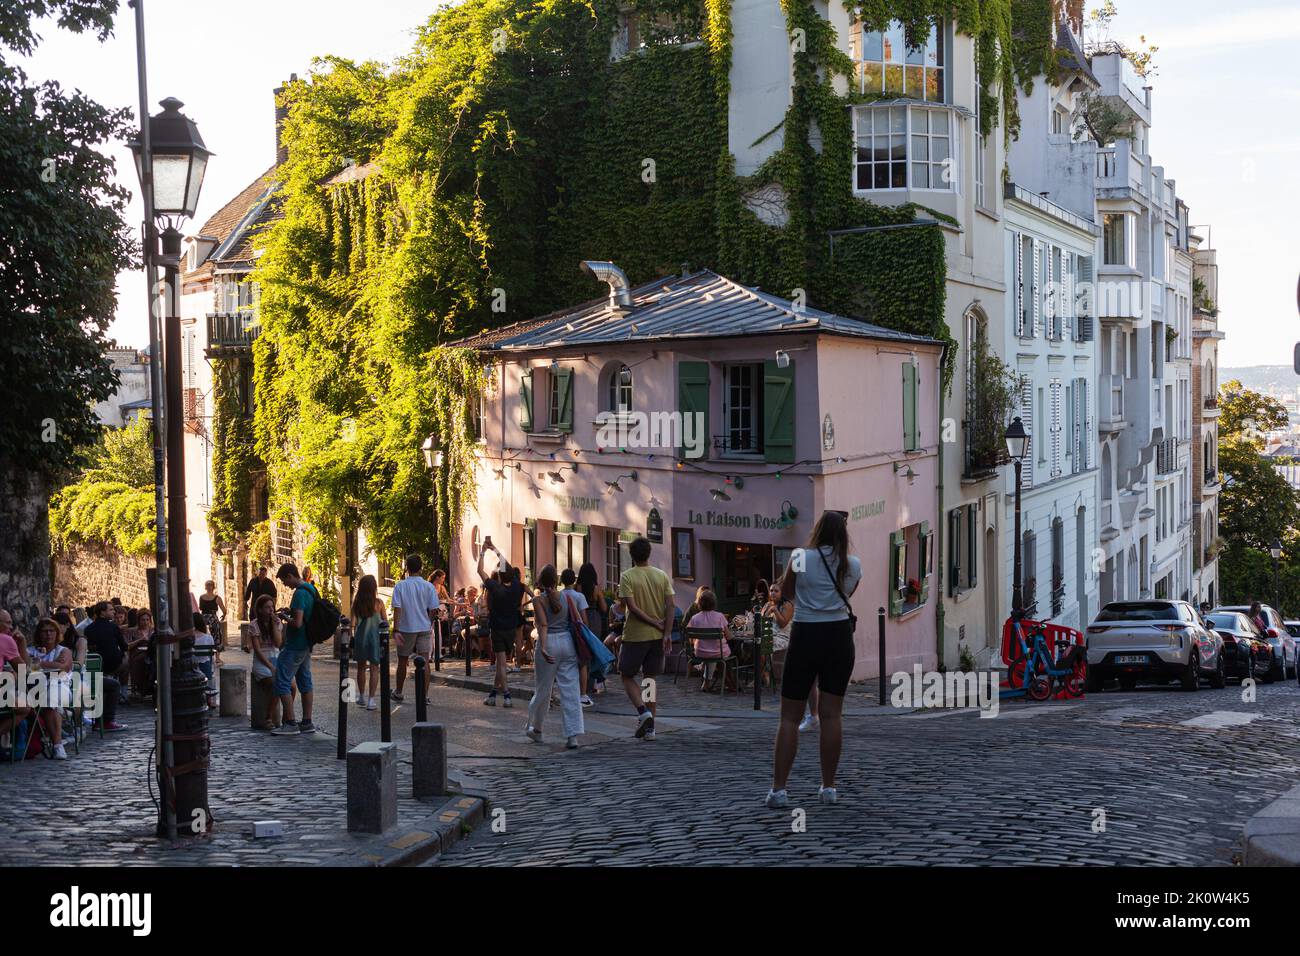 Paris, France - July, 15: Cozy old street with pink house restaurant called La Maison Rose at the quarter Montmartre in Paris on July 15, 2022 Stock Photo